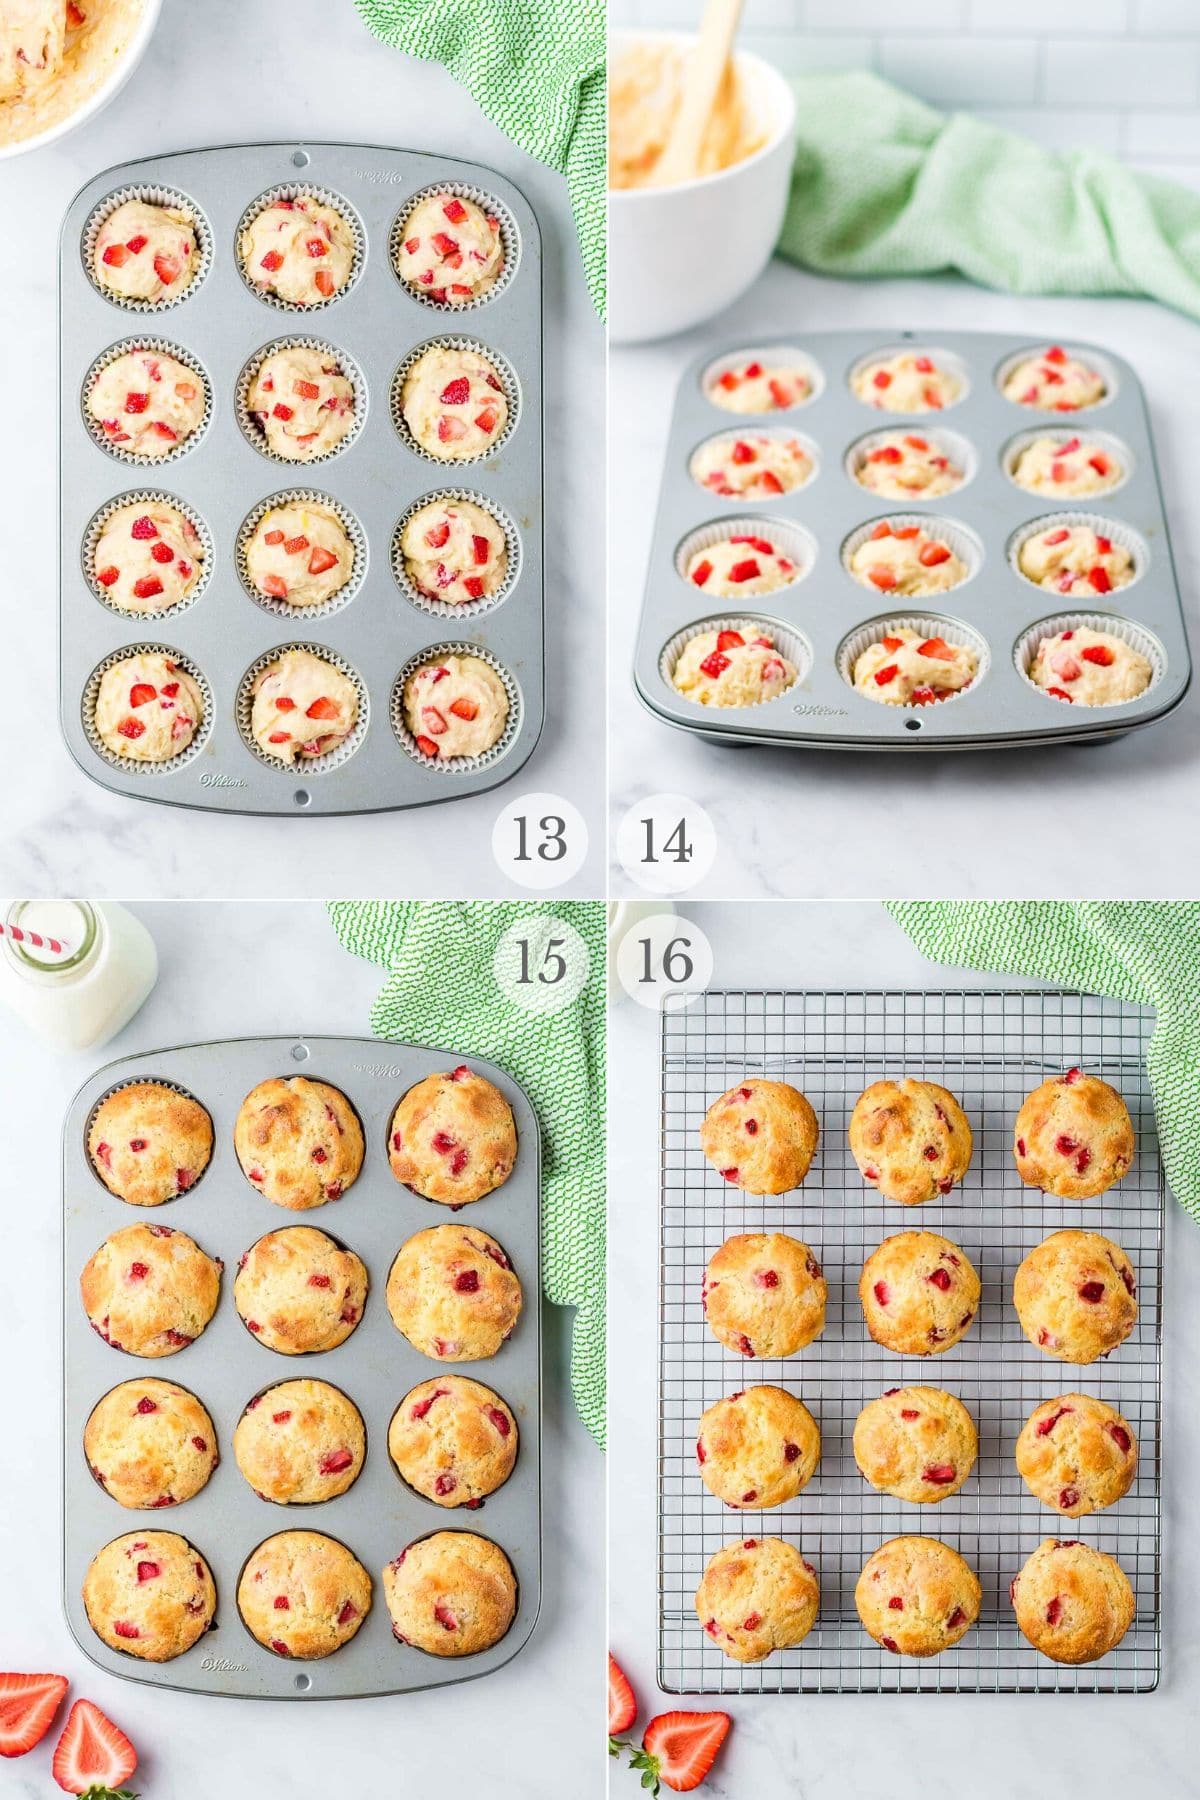 Strawberry Muffins recipes steps photos 13-16 (baking the cooling the muffins)